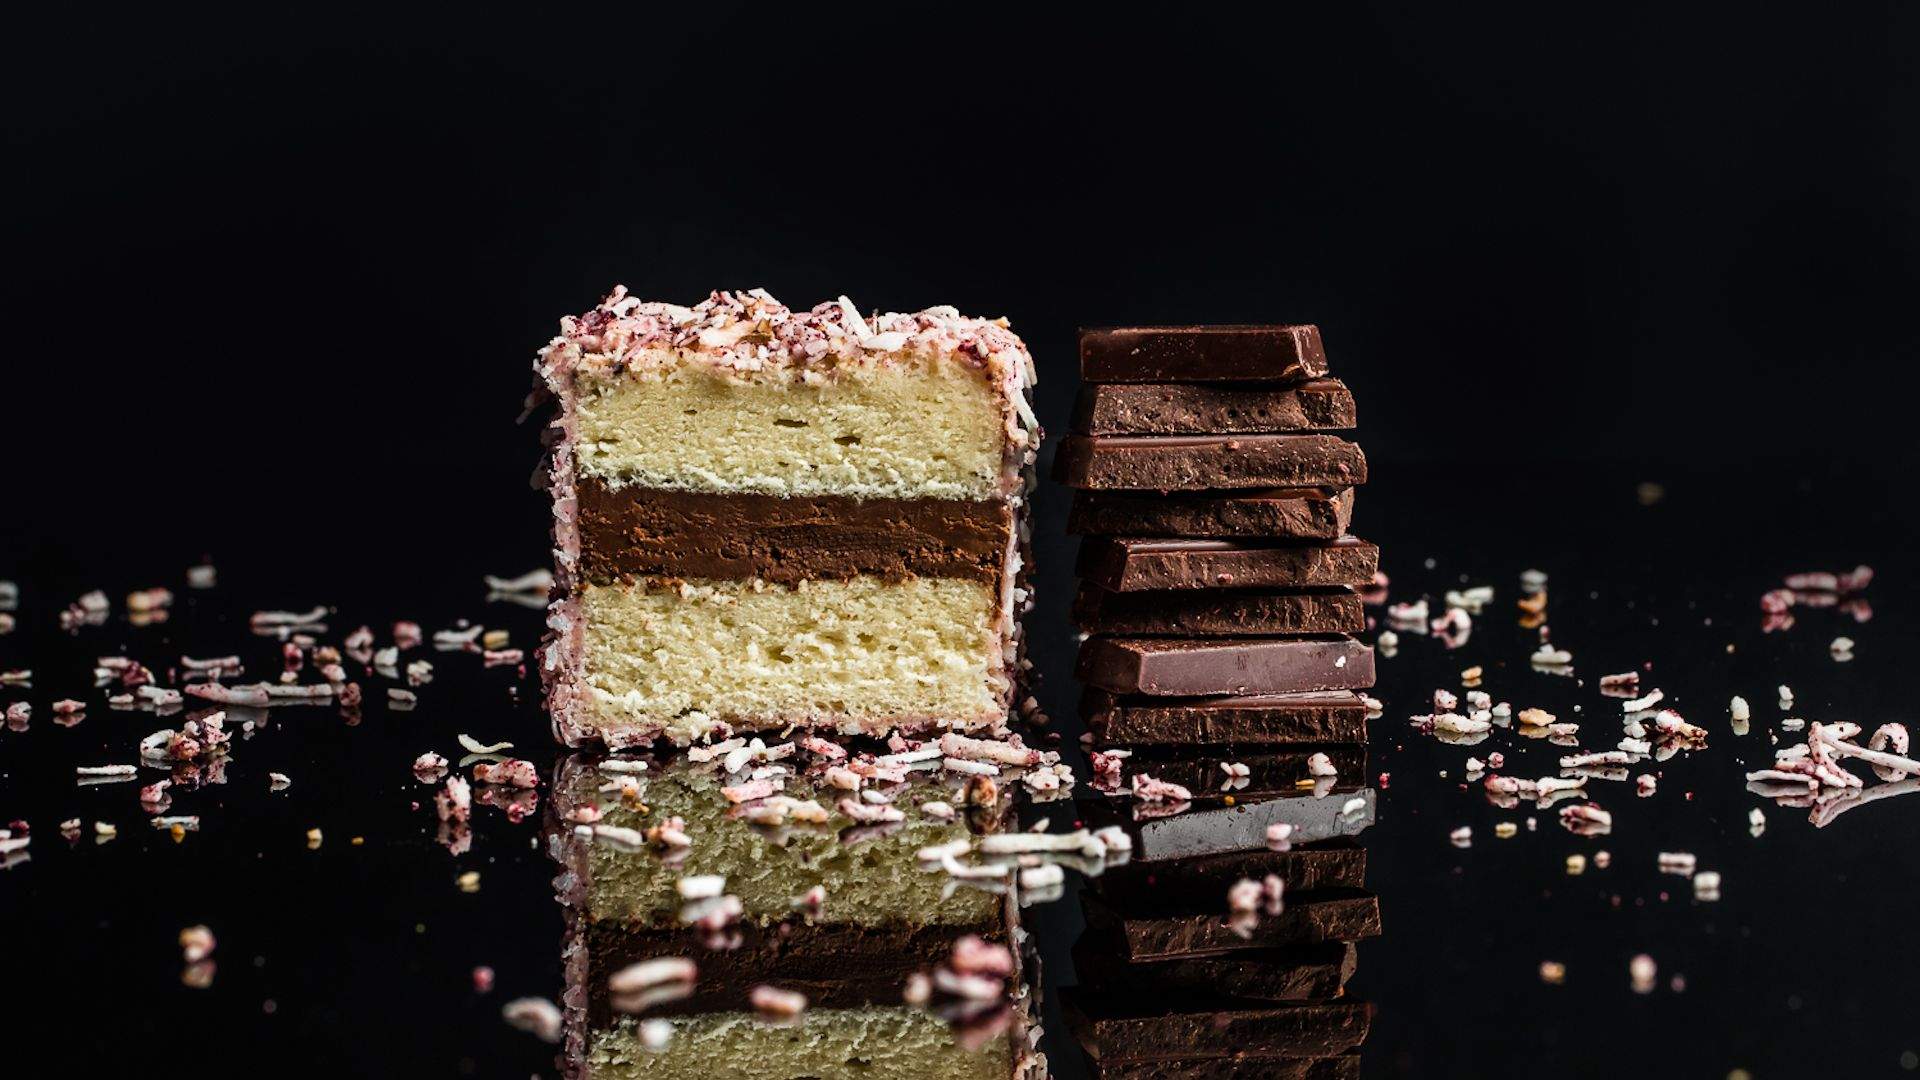 Tokyo Lamington Is Popping Up at Koko Black Stores Across Sydney and Melbourne for One Day Only